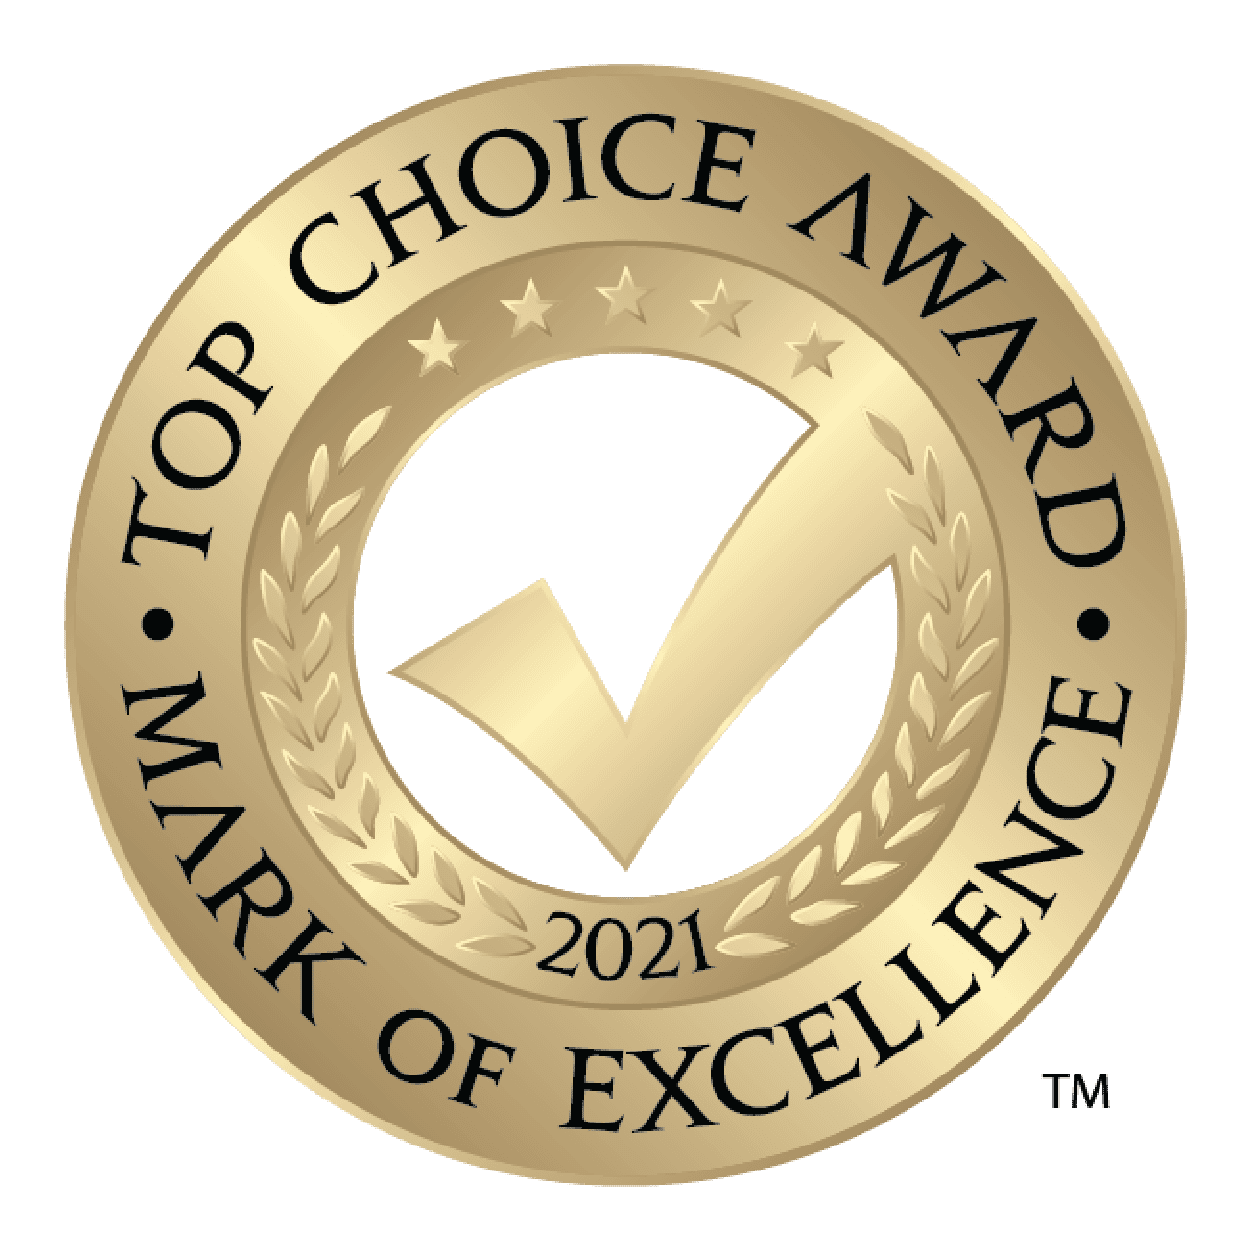 Top Choice Childcare in the GTA Award 2021